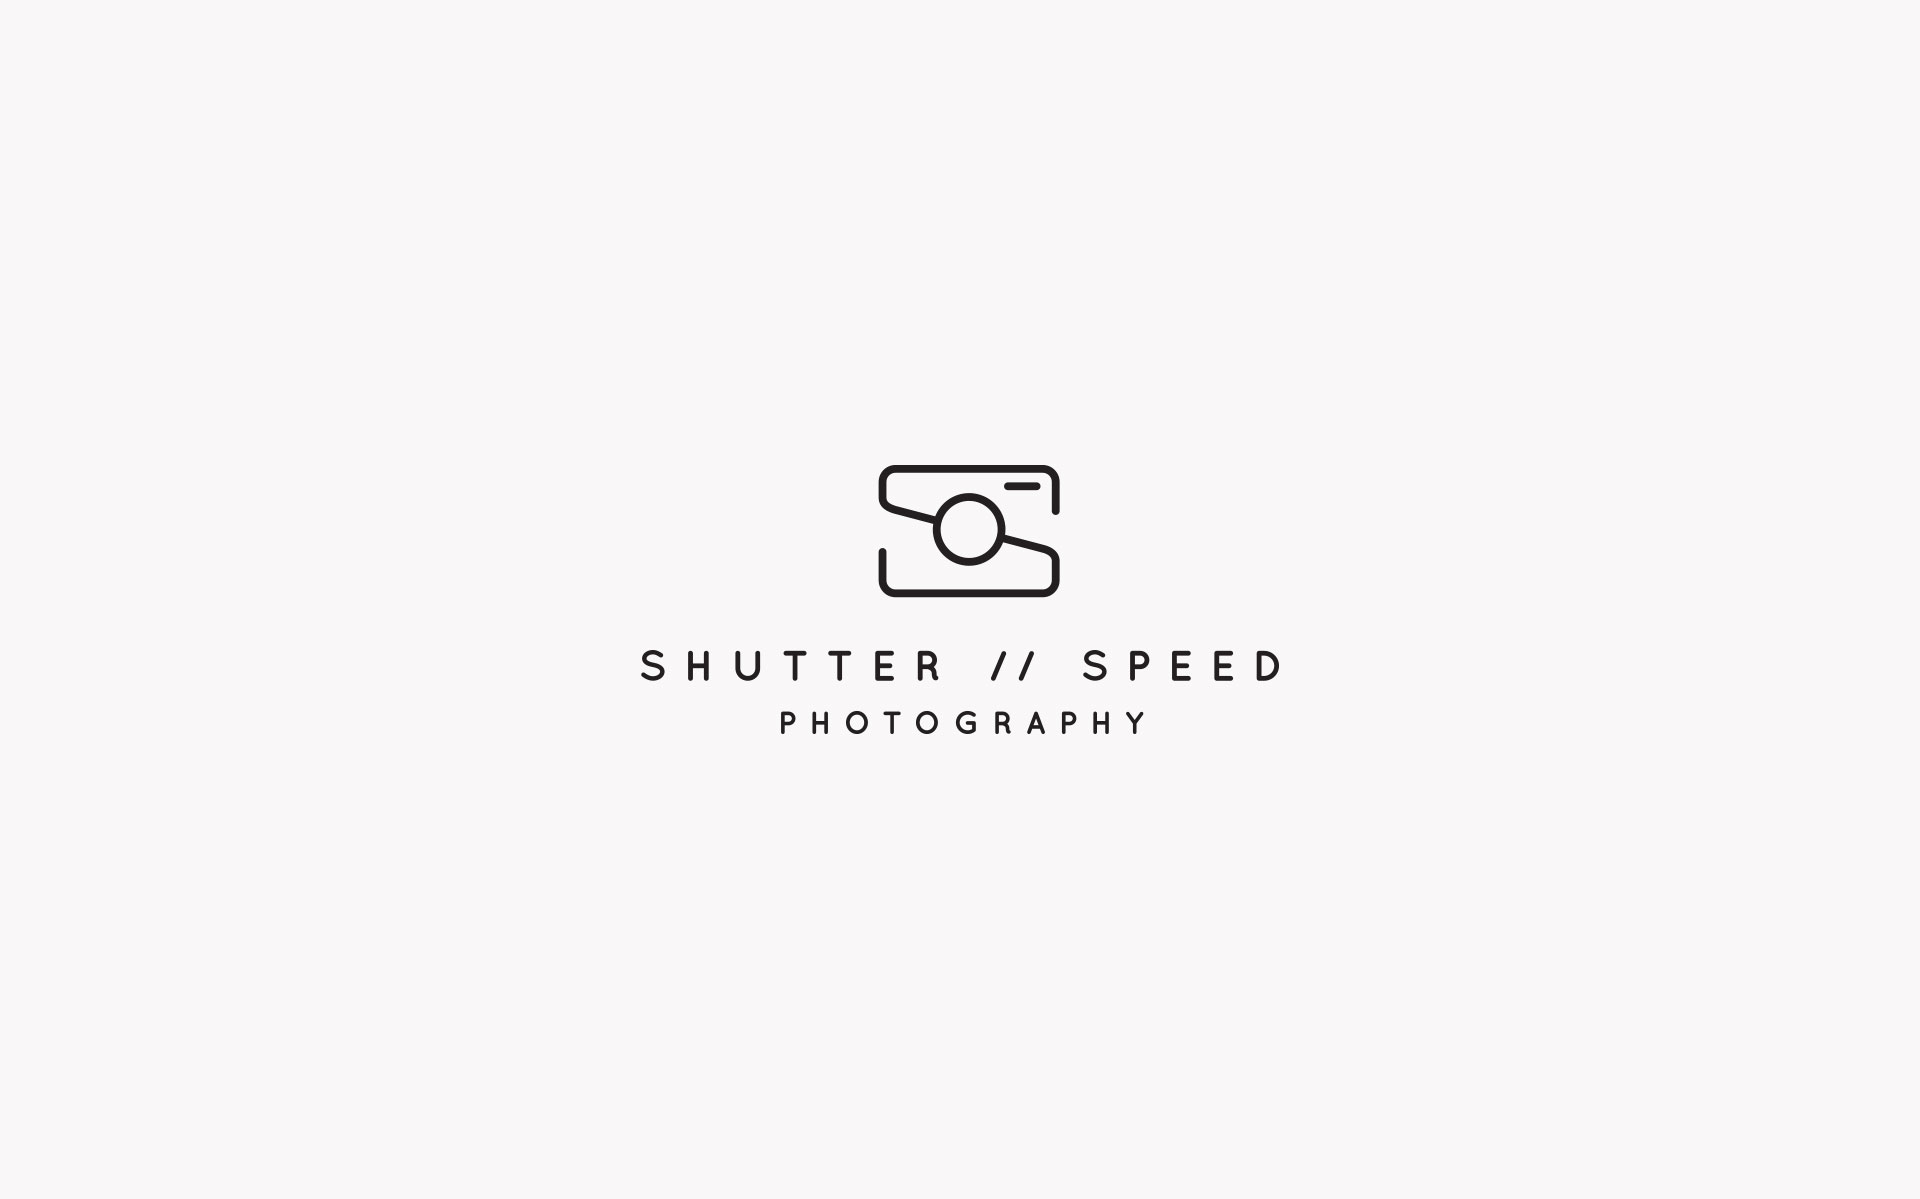 Shutterspeed logo, branding, marketing & online design & build by Amy at Yellow Sunday